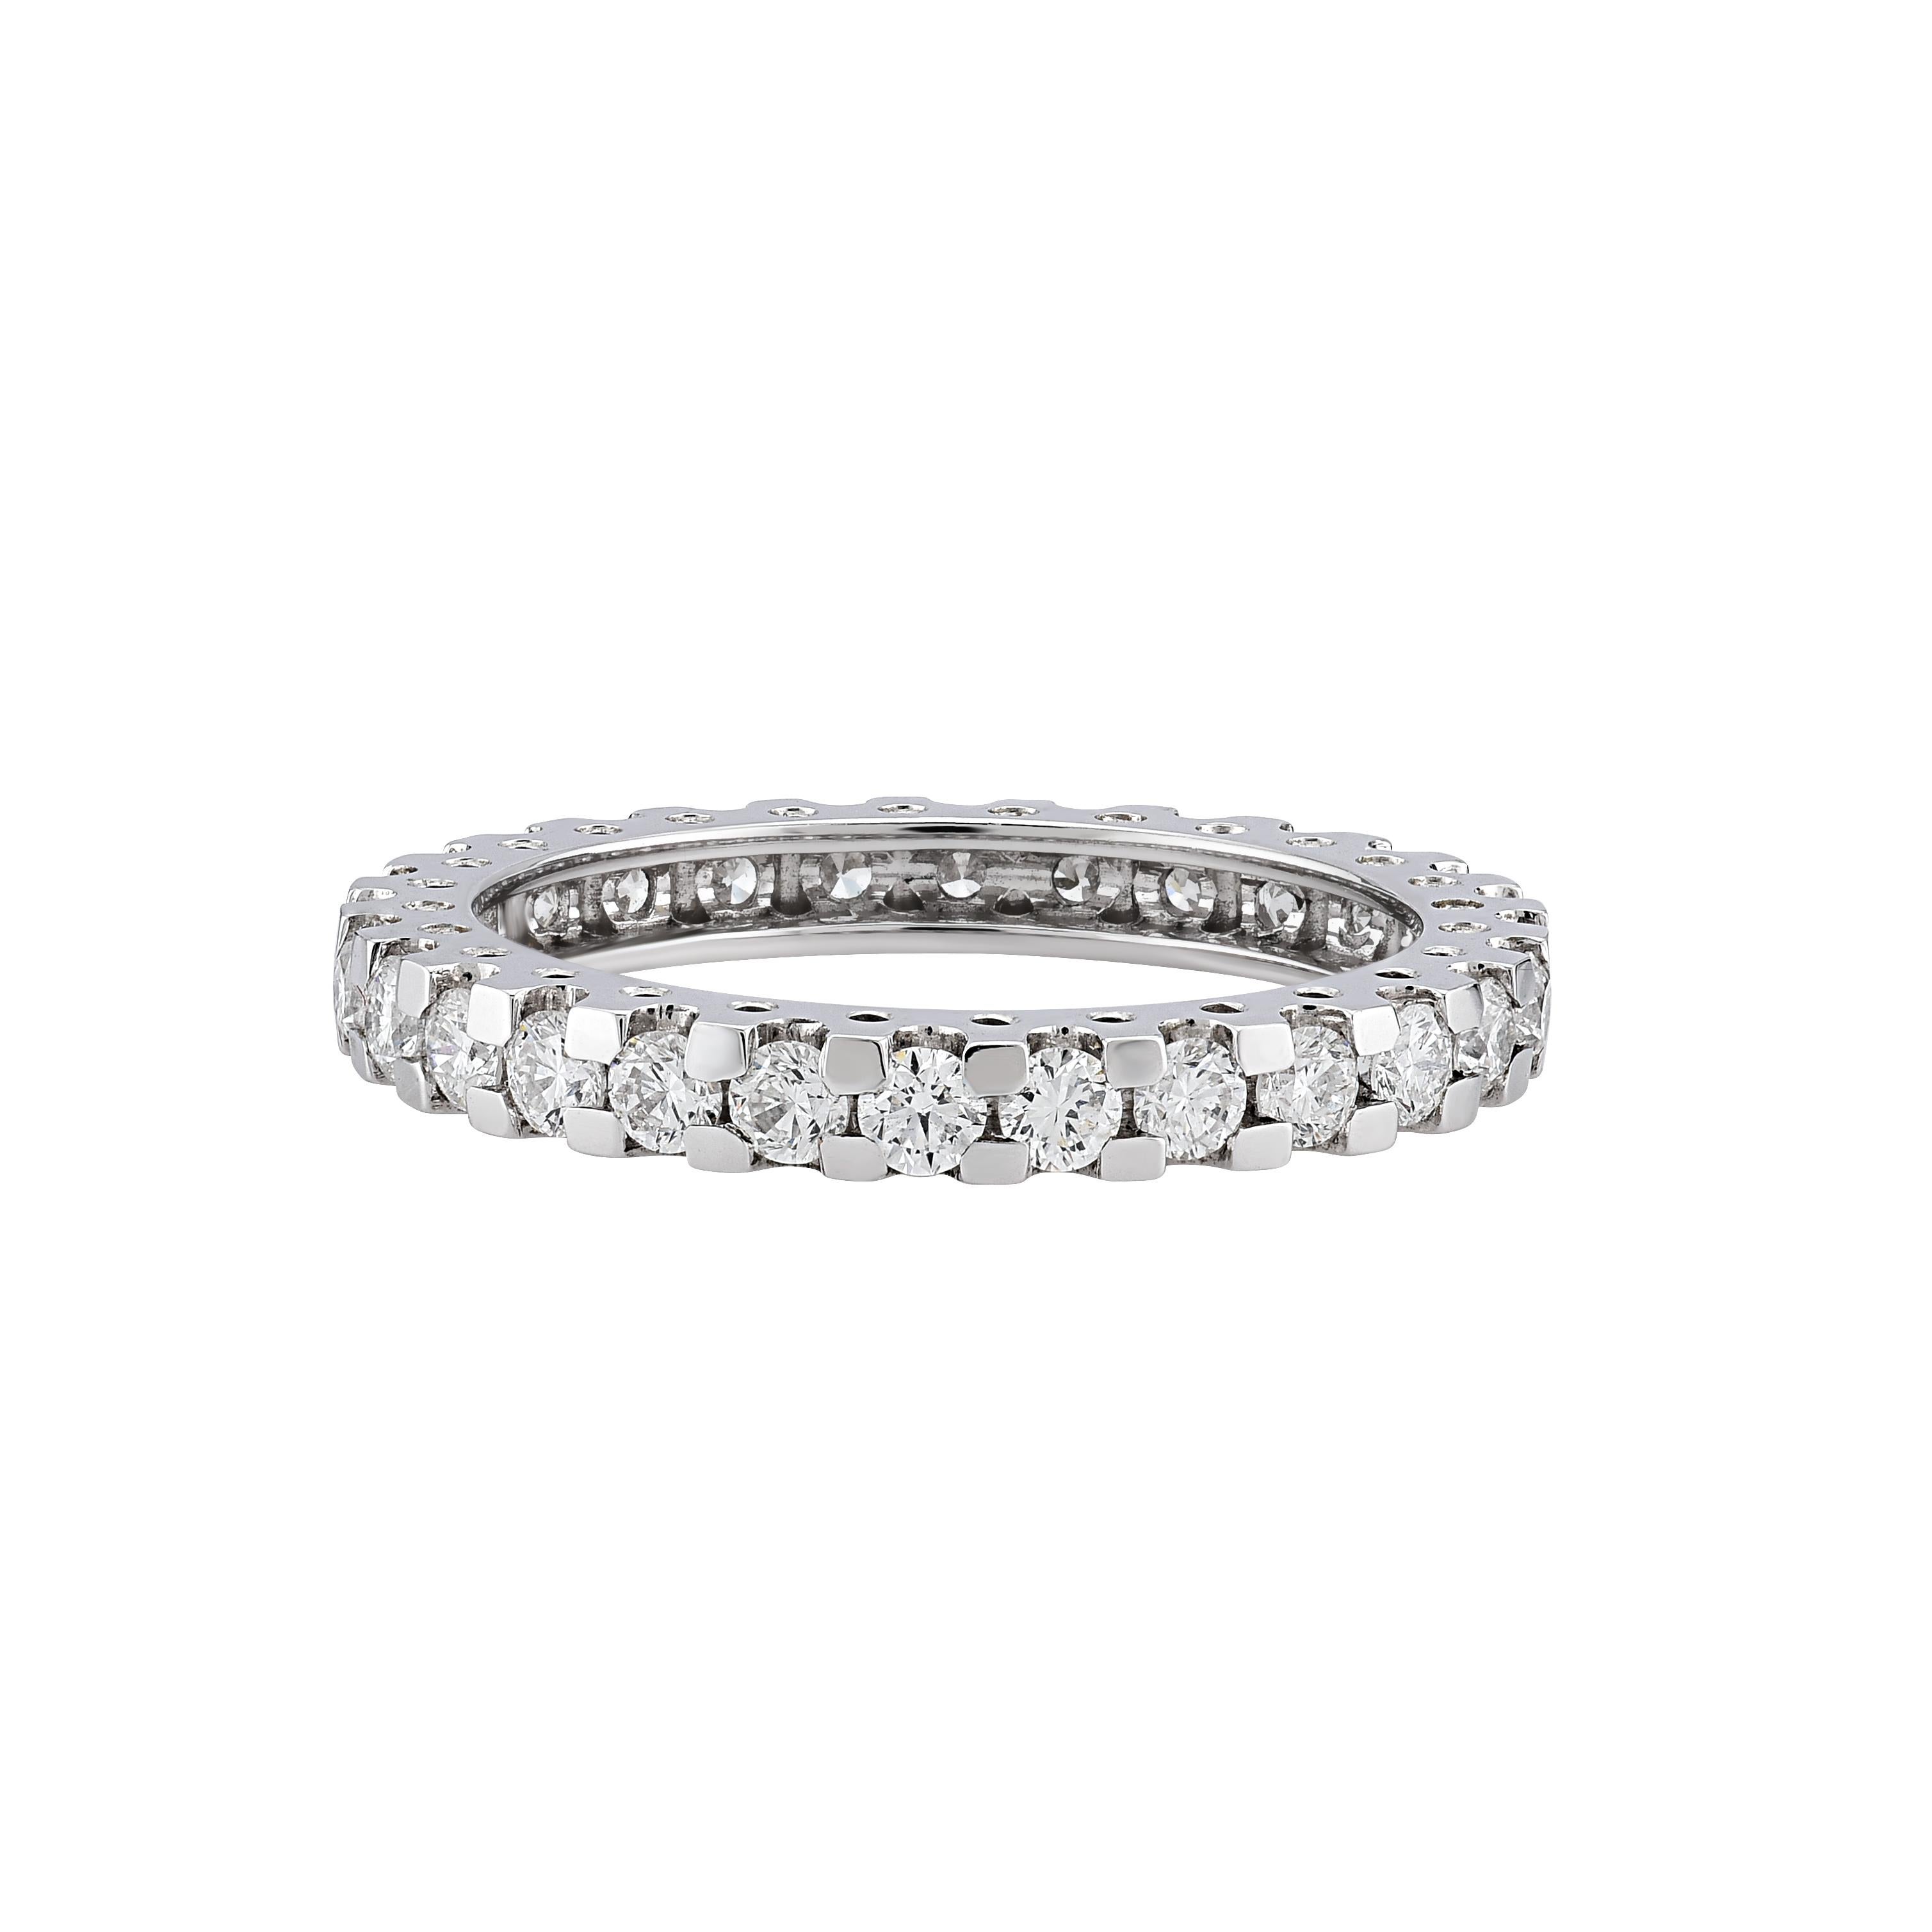 Beautiful ring in 18K white gold with diamonds.

MATERIAL
◘ Weight 2.95gr.
◘ 28 Round Diamonds aprox 1,16ct.

READY TO SHIP
*Shipment of this piece is not affected by COVID-19. 
Orders welcome!*

PRADERA is a  second generation of a family run